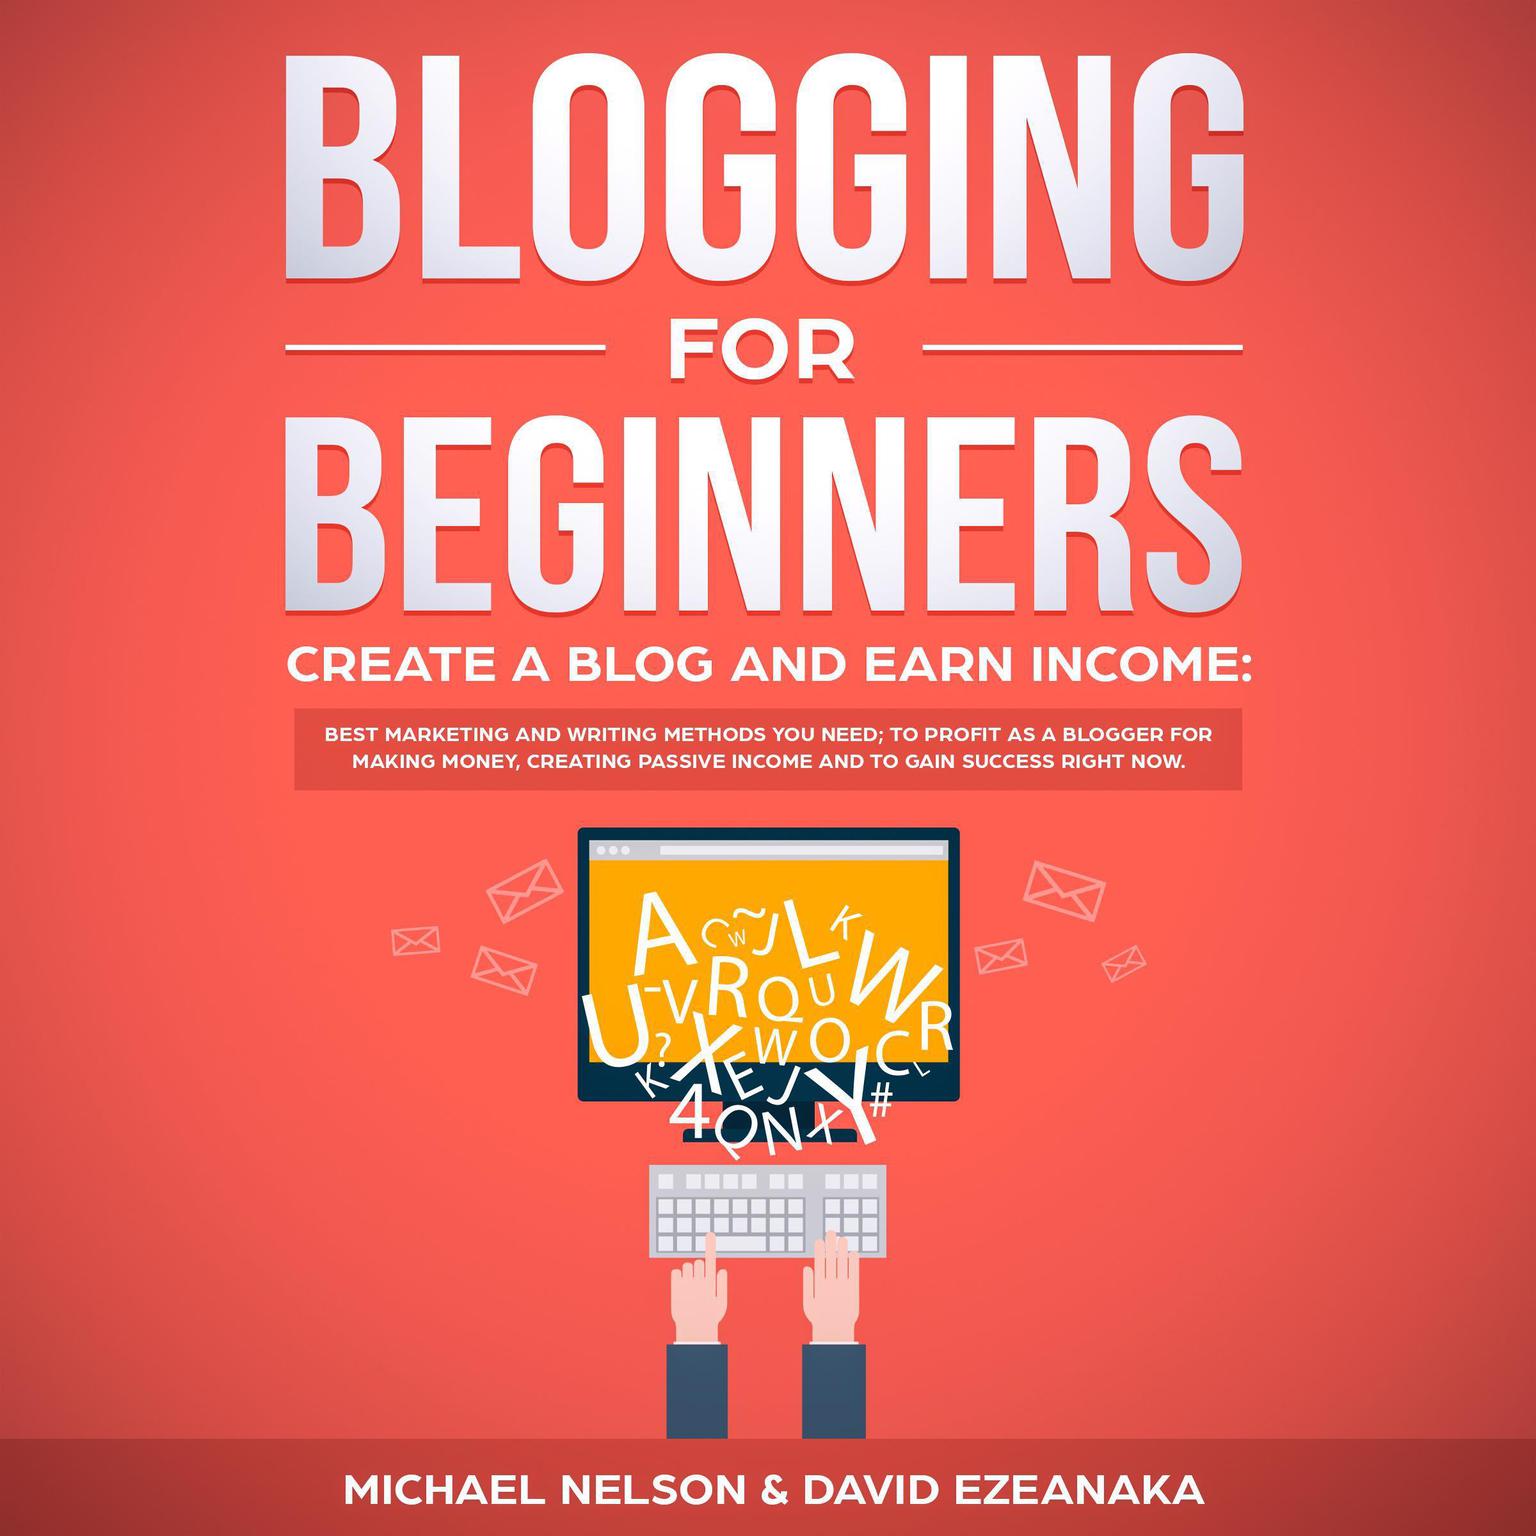 Blogging for Beginners, Create a Blog and Earn Income: : Best Marketing and Writing Methods You NEED; to Profit as a Blogger for Making Money, Creating Passive Income and to Gain Success RIGHT NOW. Audiobook, by David Ezeanaka